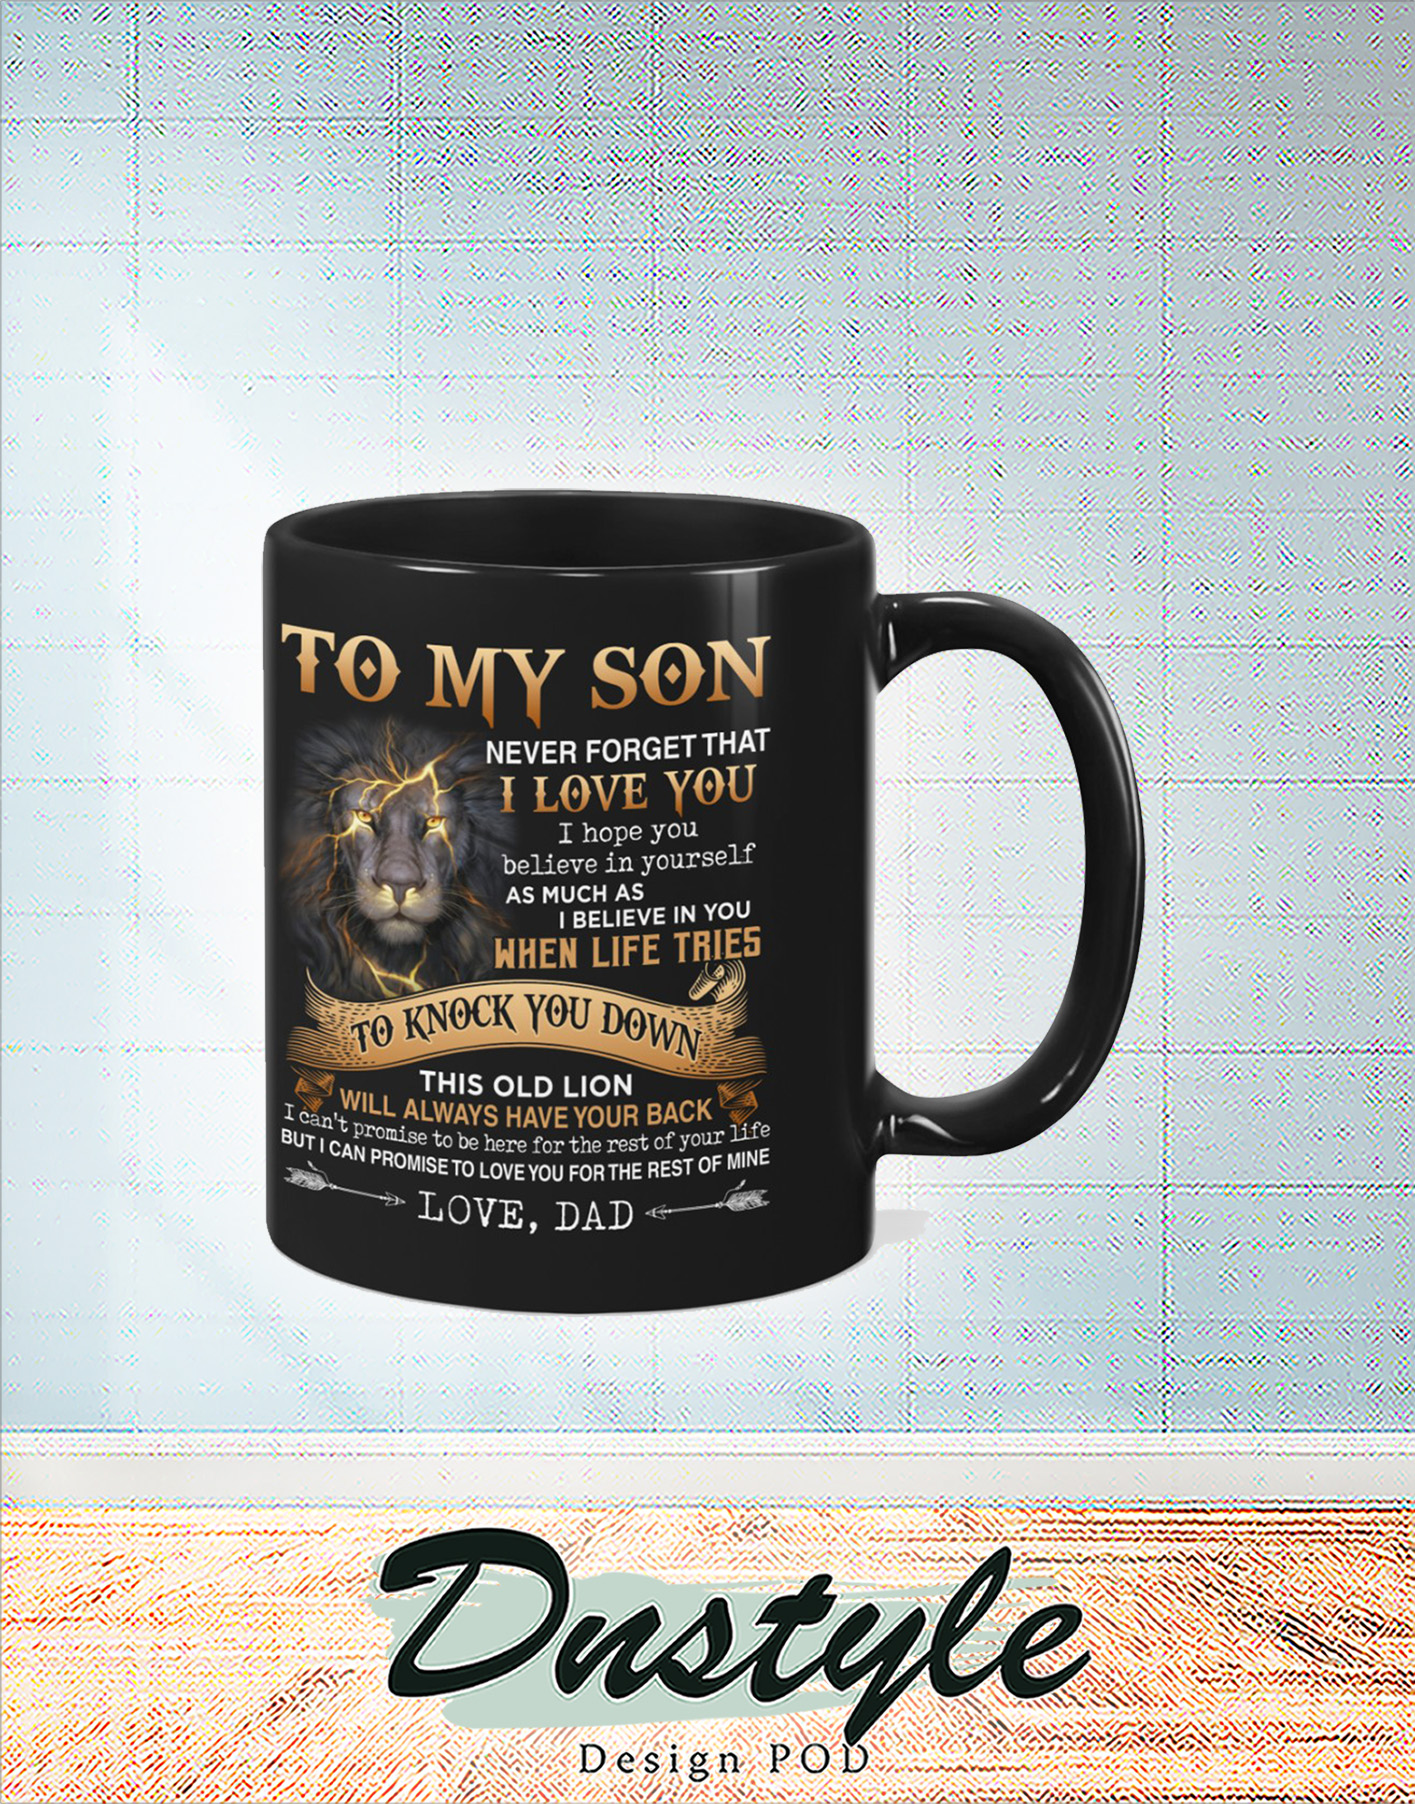 To my son this old lion will aways have your back love mom mug 1